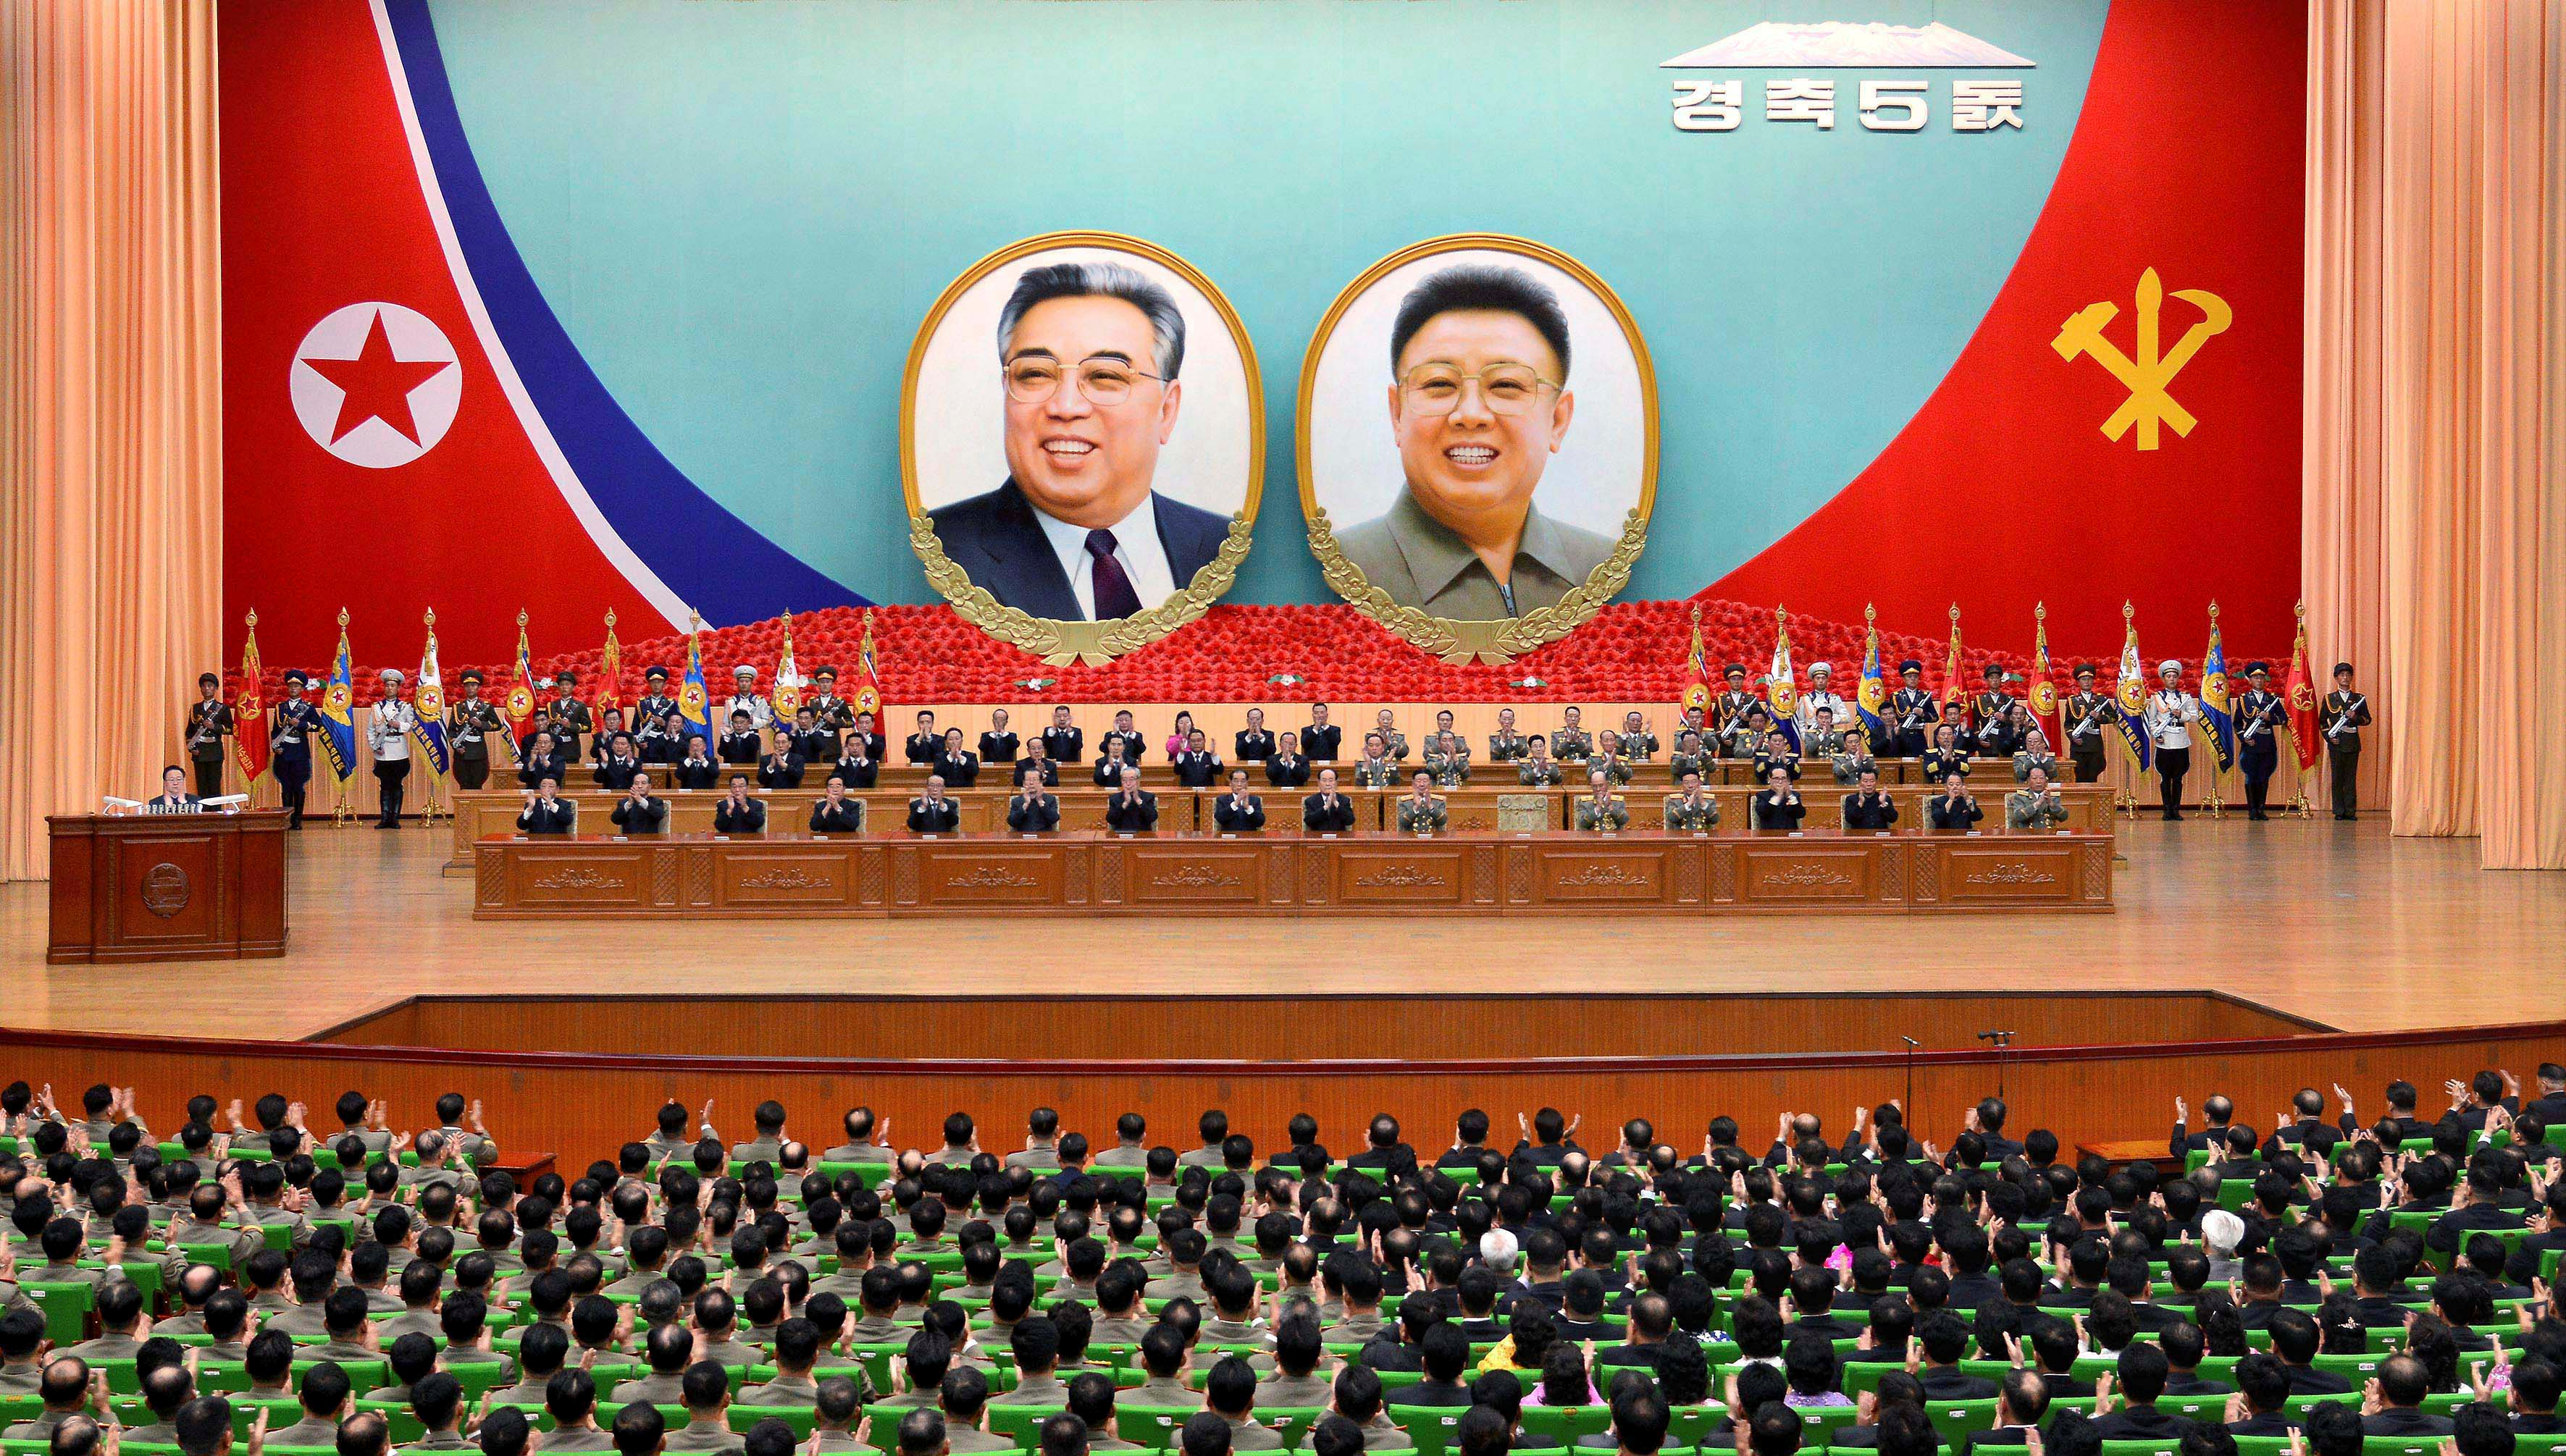 A general view of a national meeting took place to celebrate the 5th anniversary of leader Kim Jong Un's assumption of the top posts of the party and the state in this undated photo released by North Korea's KCNA in Pyongyang